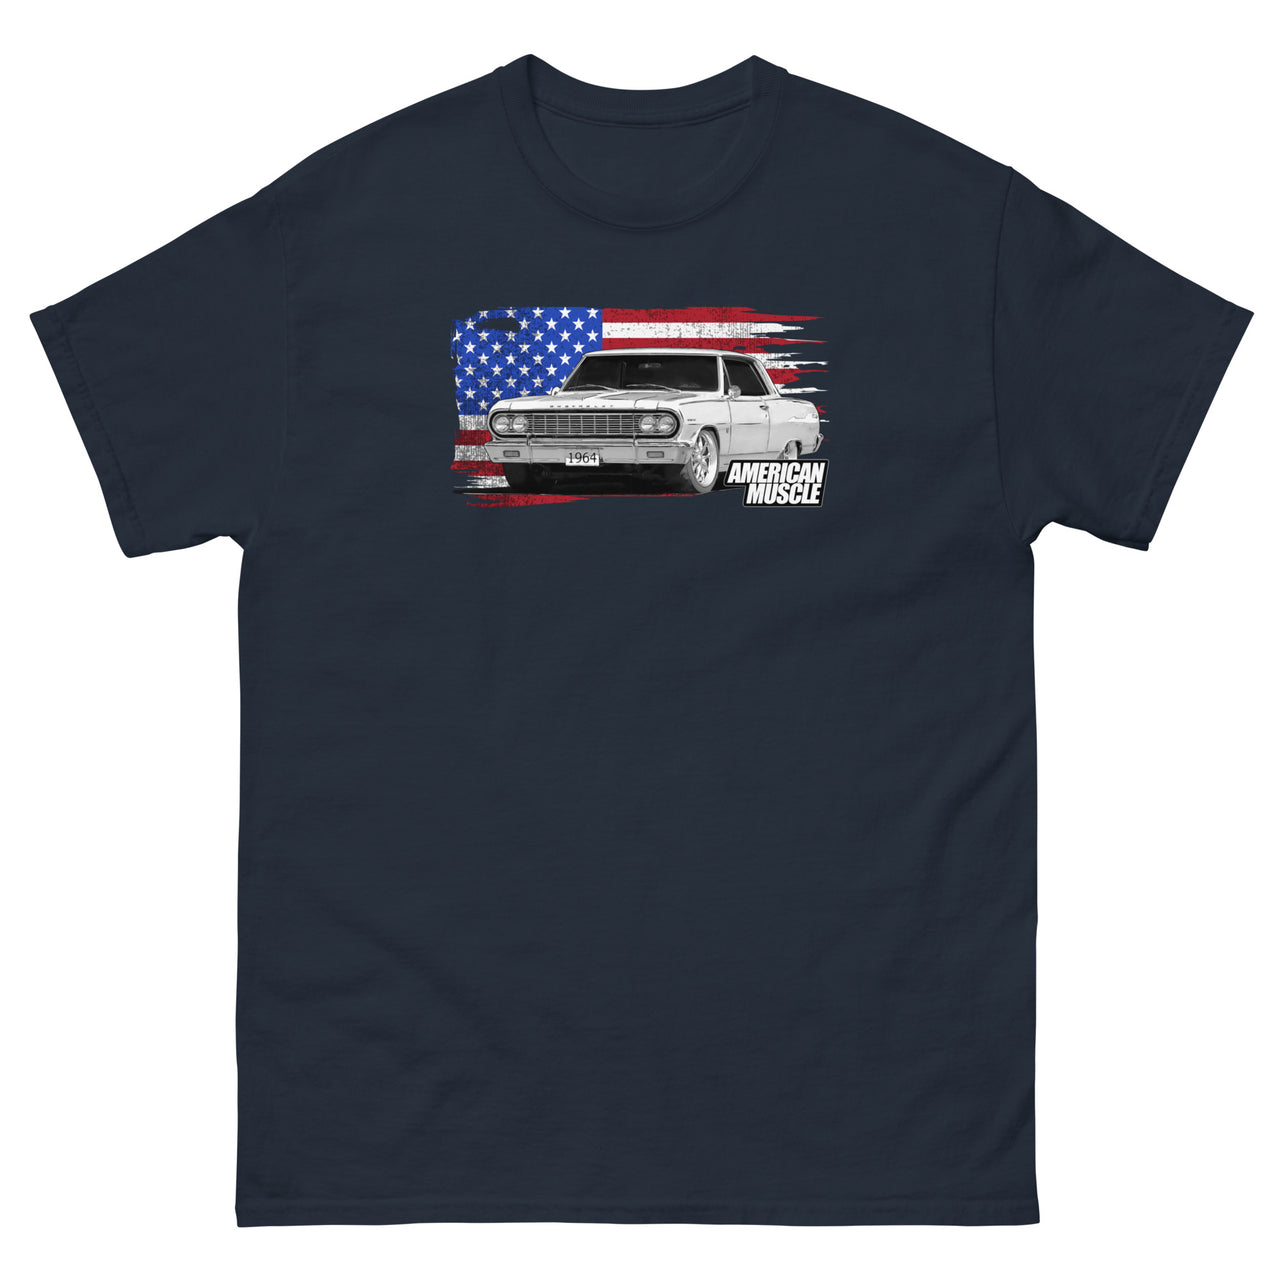 1964 Chevelle T-Shirt With American Flag